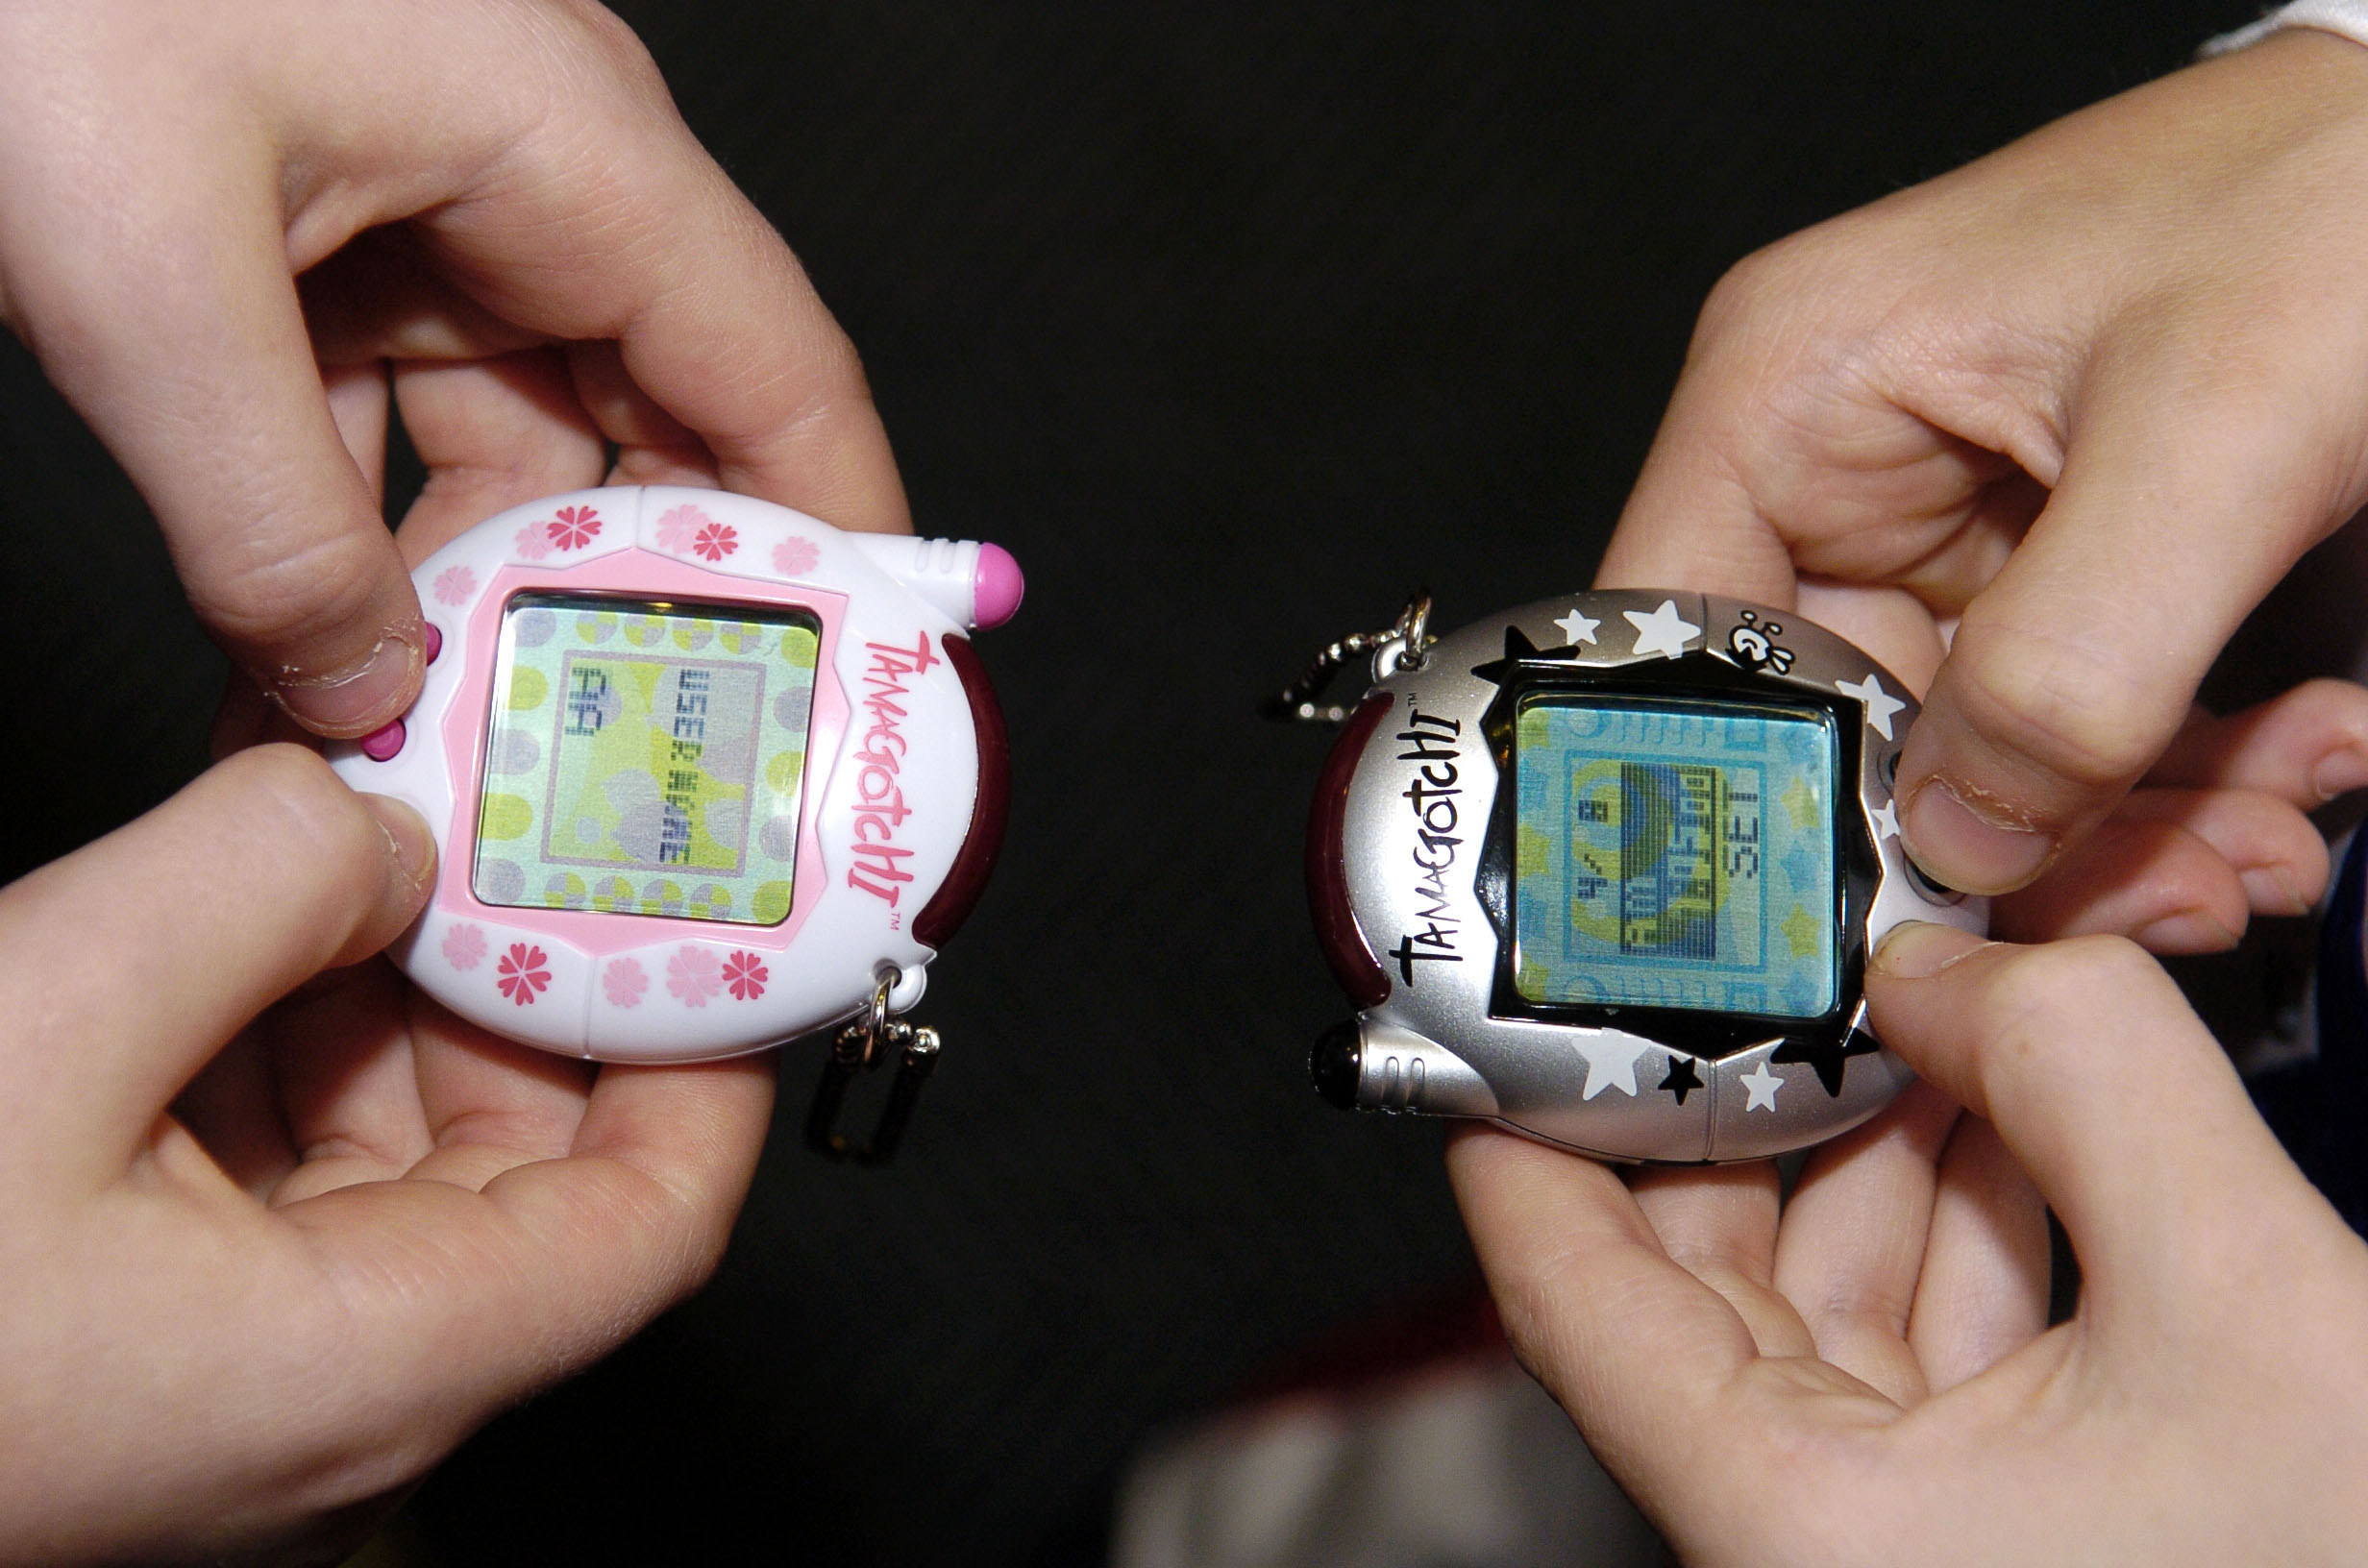 Two people set up their Tamagotchis